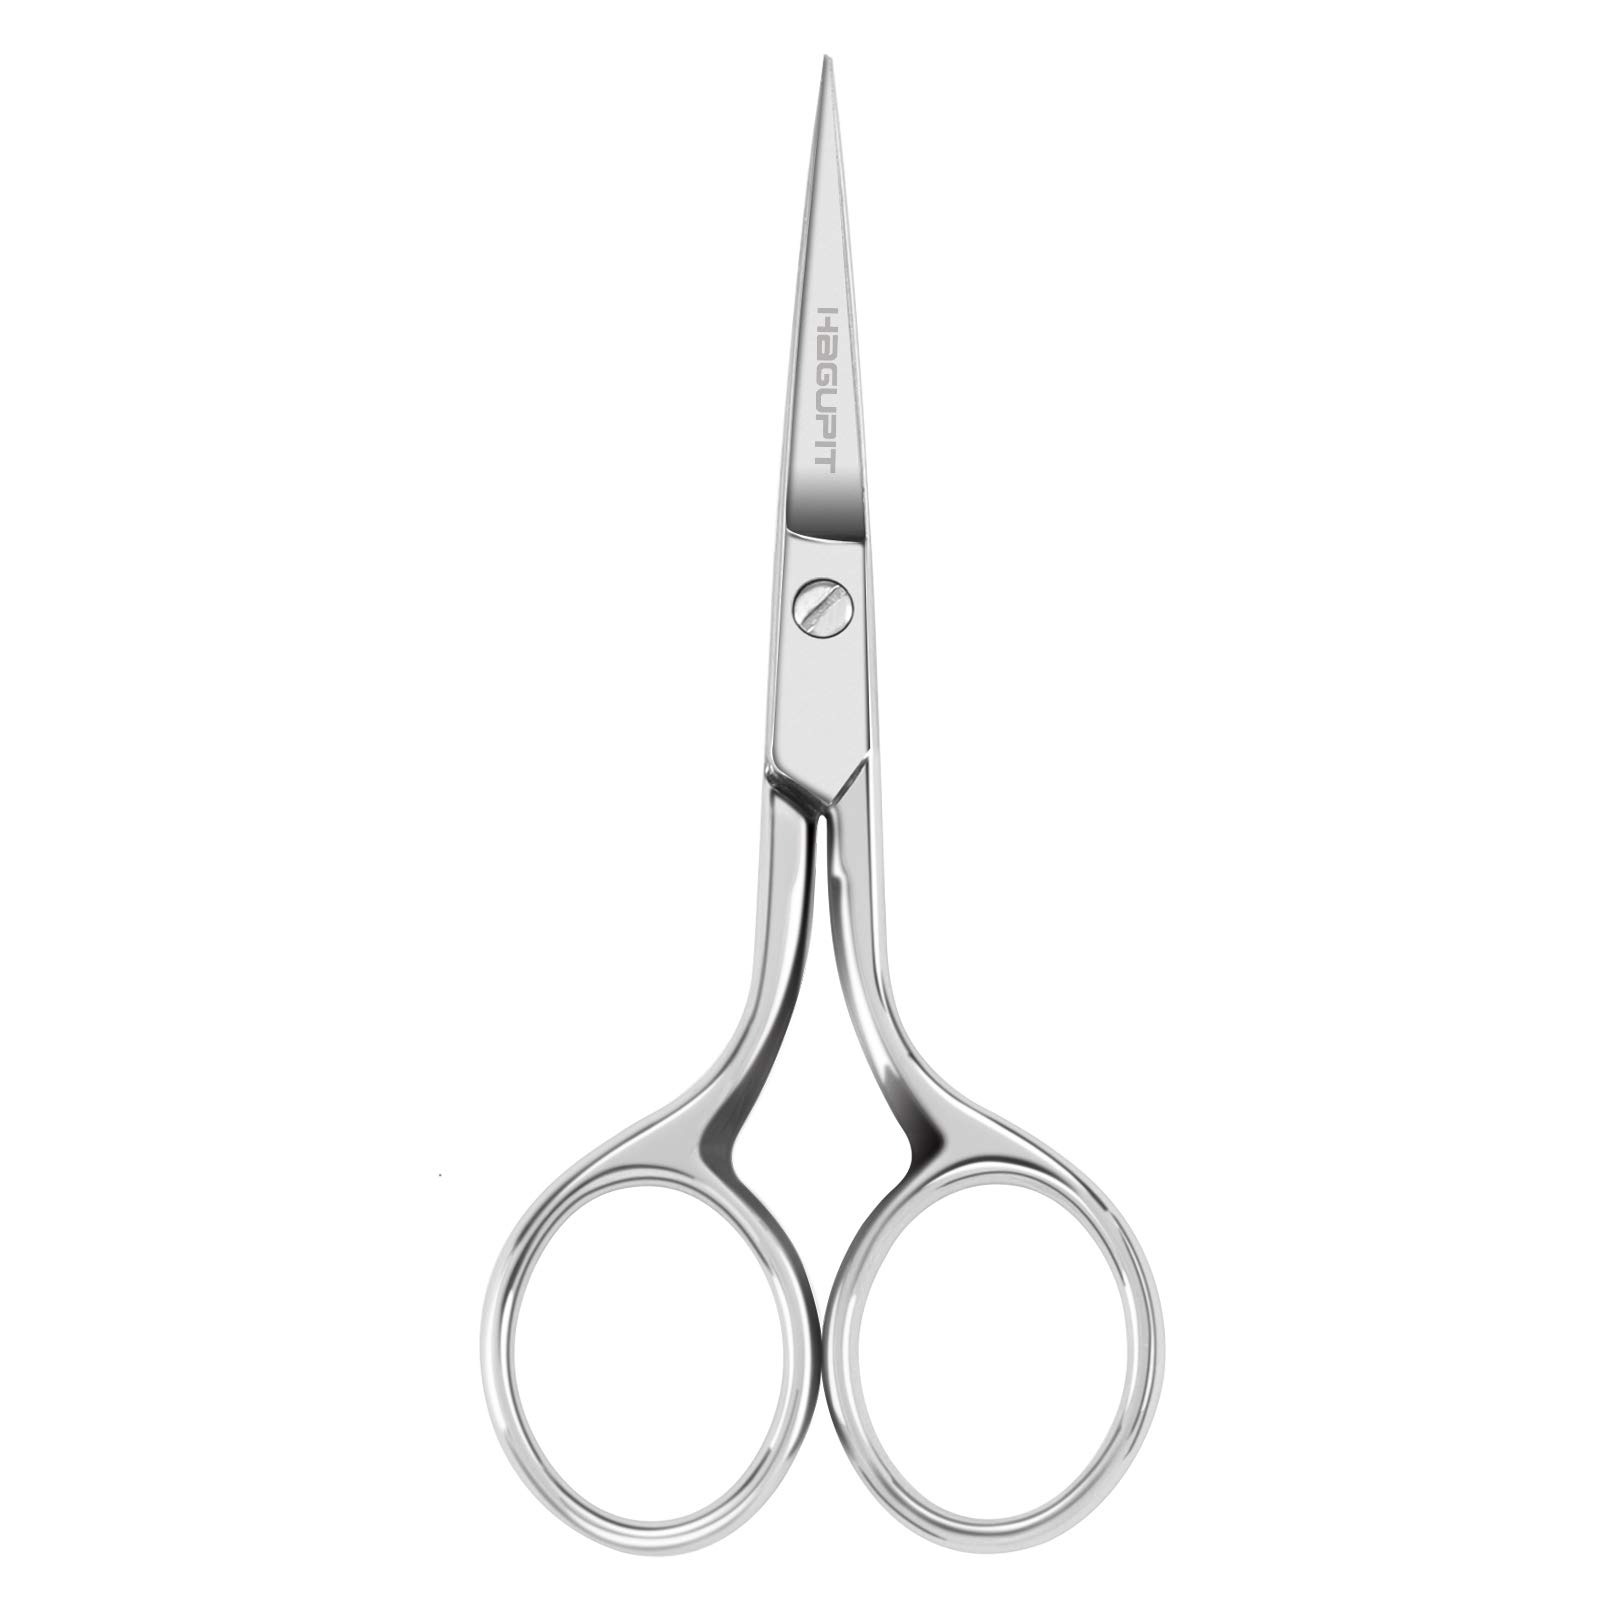 Small Scissors, Stainless Steel Scissors Multi-Purpose Fabric Scissors  Craft Scissors For Fabric For DIY For Embroidery For Sewing Gray Silver 